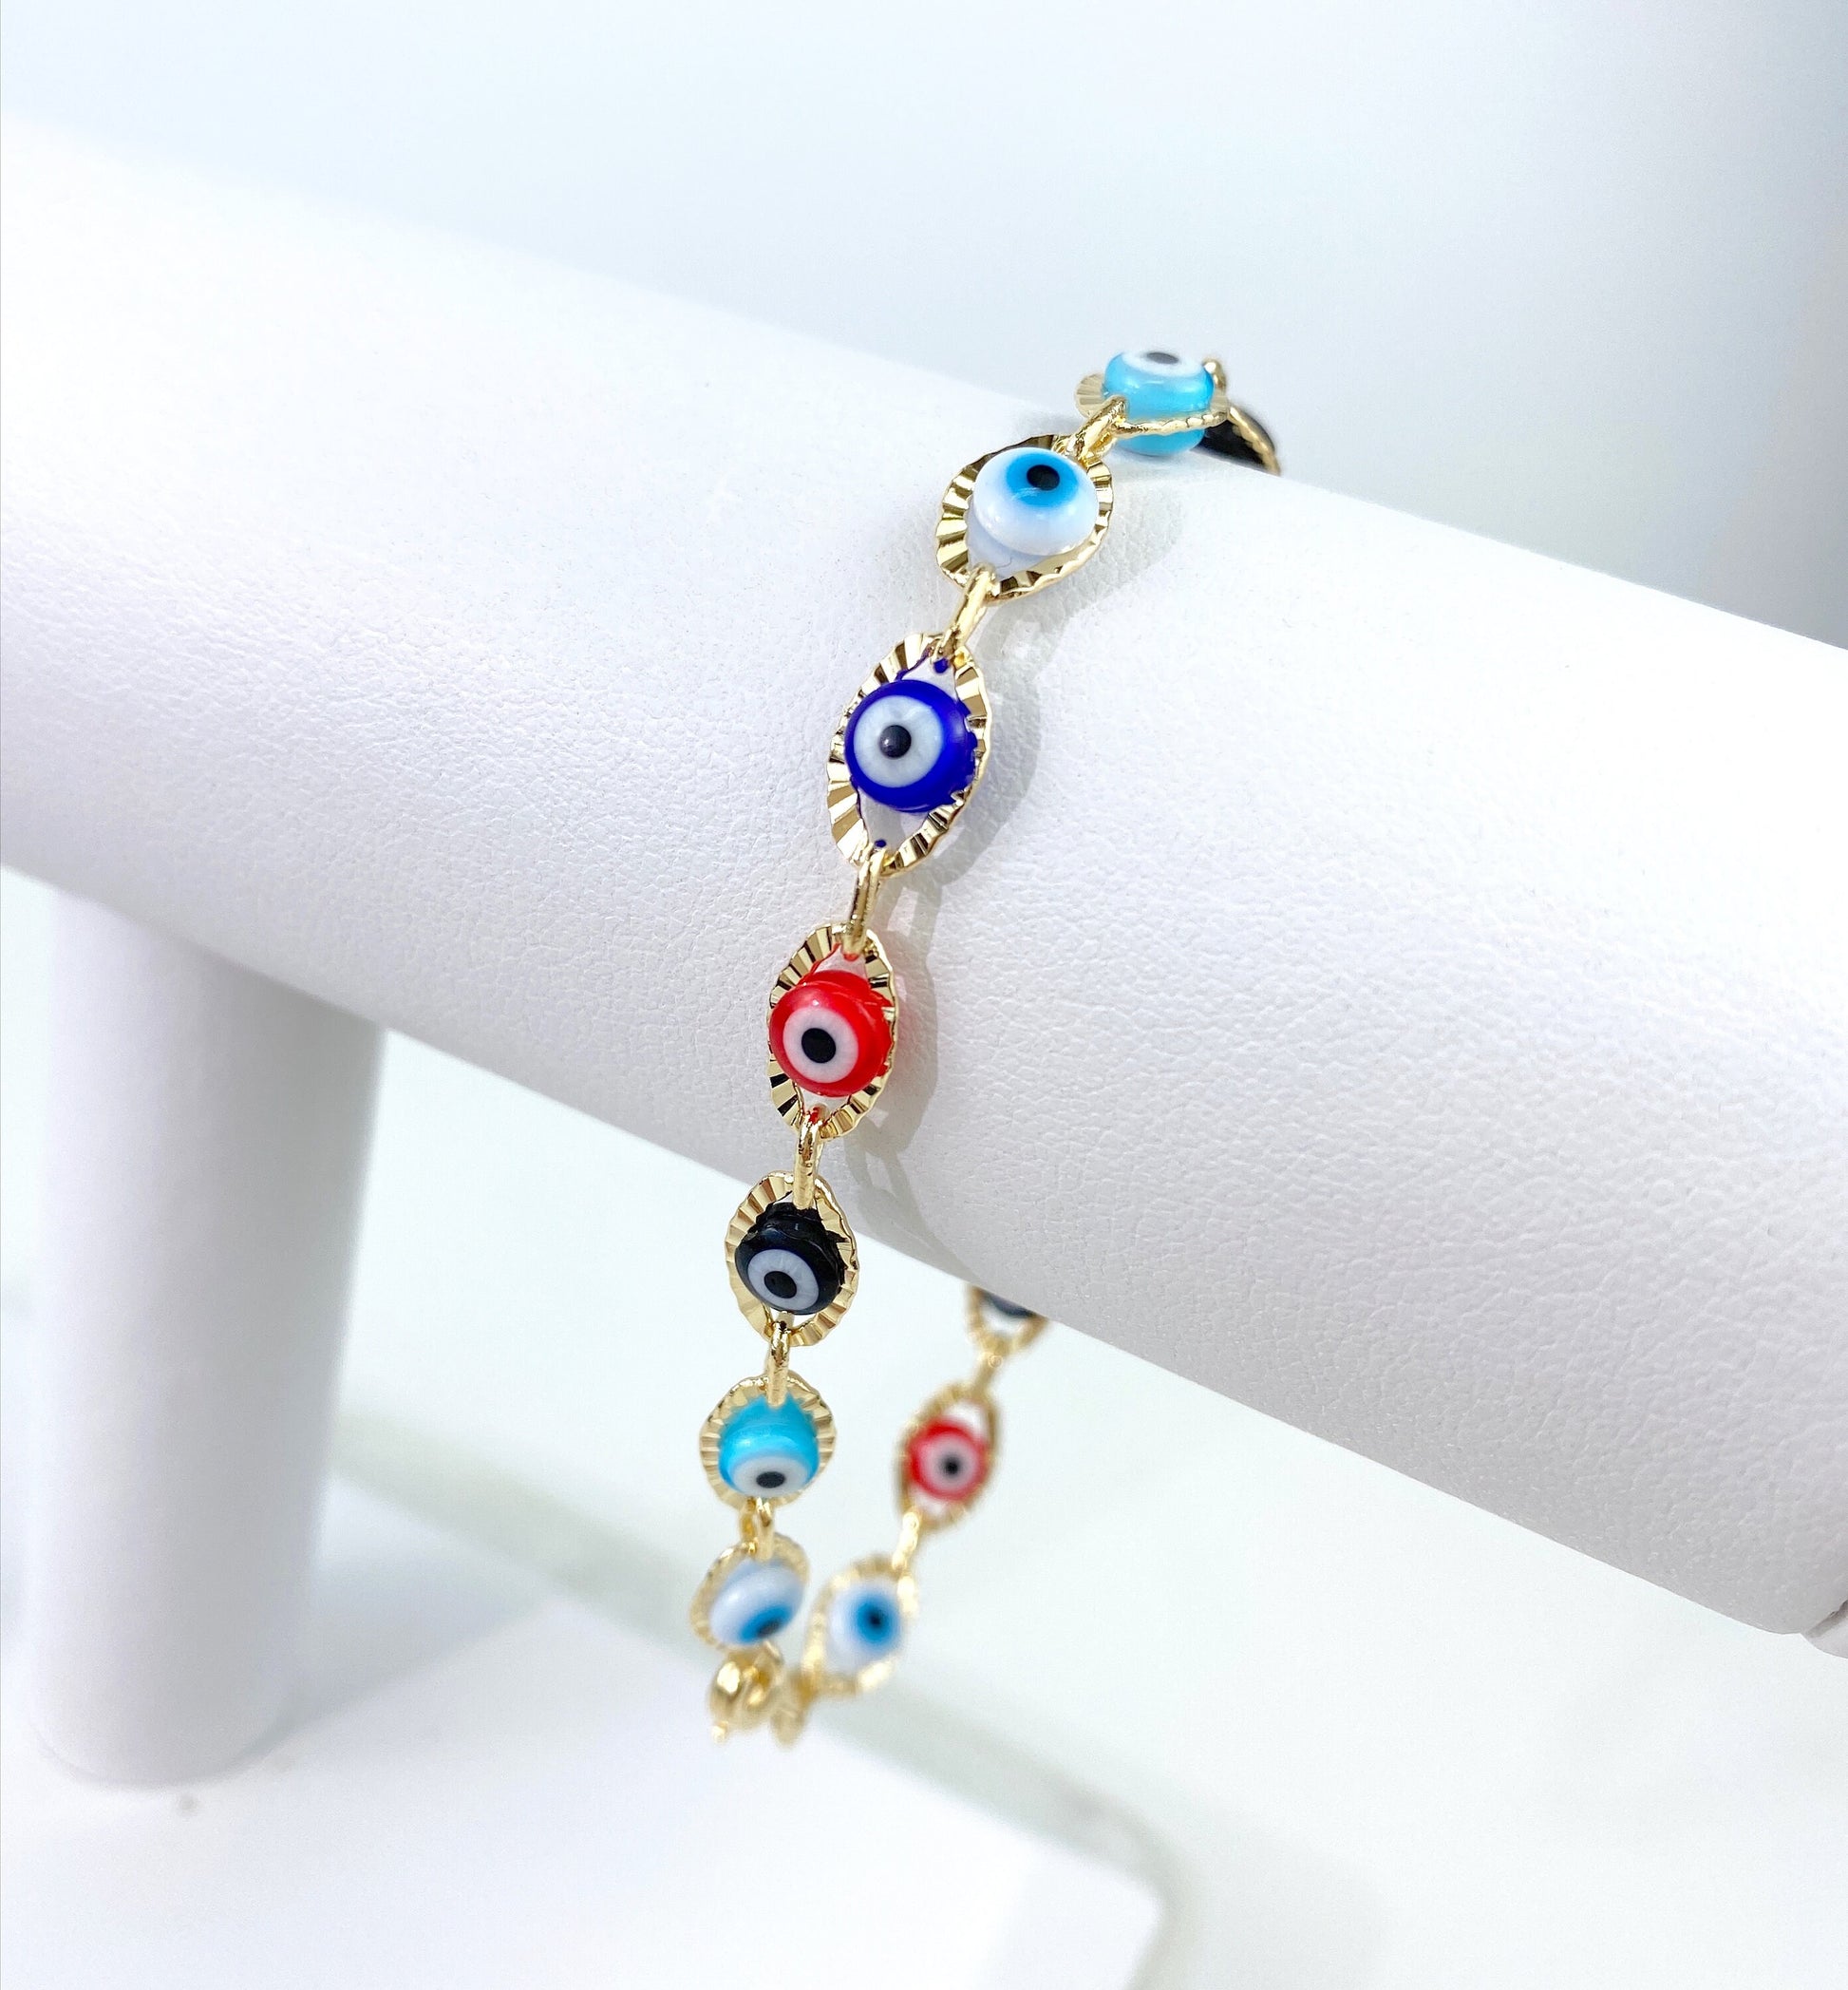 18k Gold Filled Fancy 6mm Colorful Colored, Red, Blue & Black Evil Eye Protection Bracelet or Anklet for Wholesale Jewelry Supplies